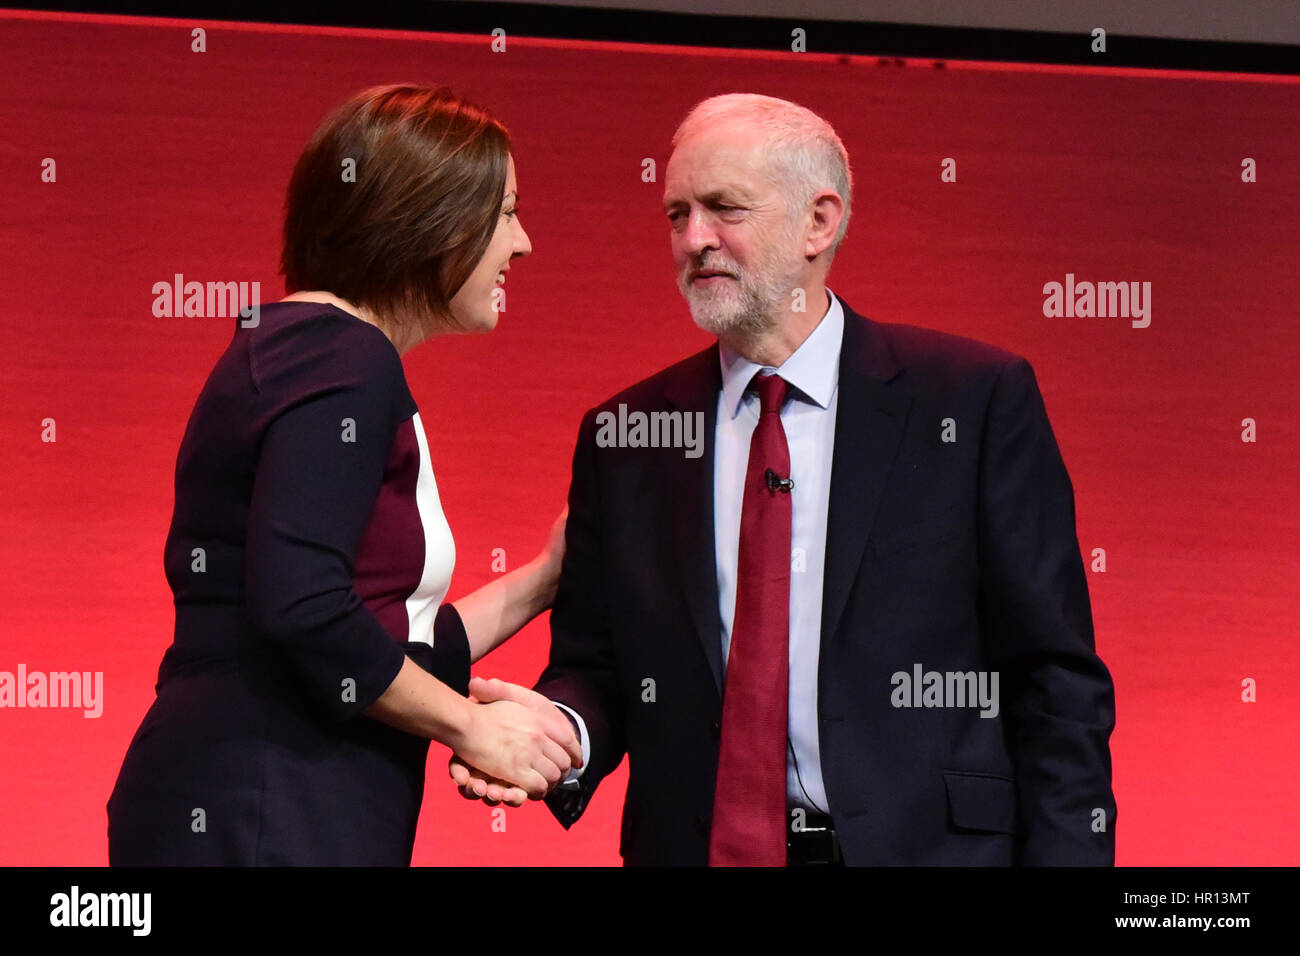 Perth, Scotland, UK. 26th February 2017. Scottish Labour leader Kezia Dugdale on stage with UK Labour leader Jeremy Corbyn after his speech to the Scottish Labour Party conference in Perth, Credit: Ken Jack/Alamy Live News Stock Photo